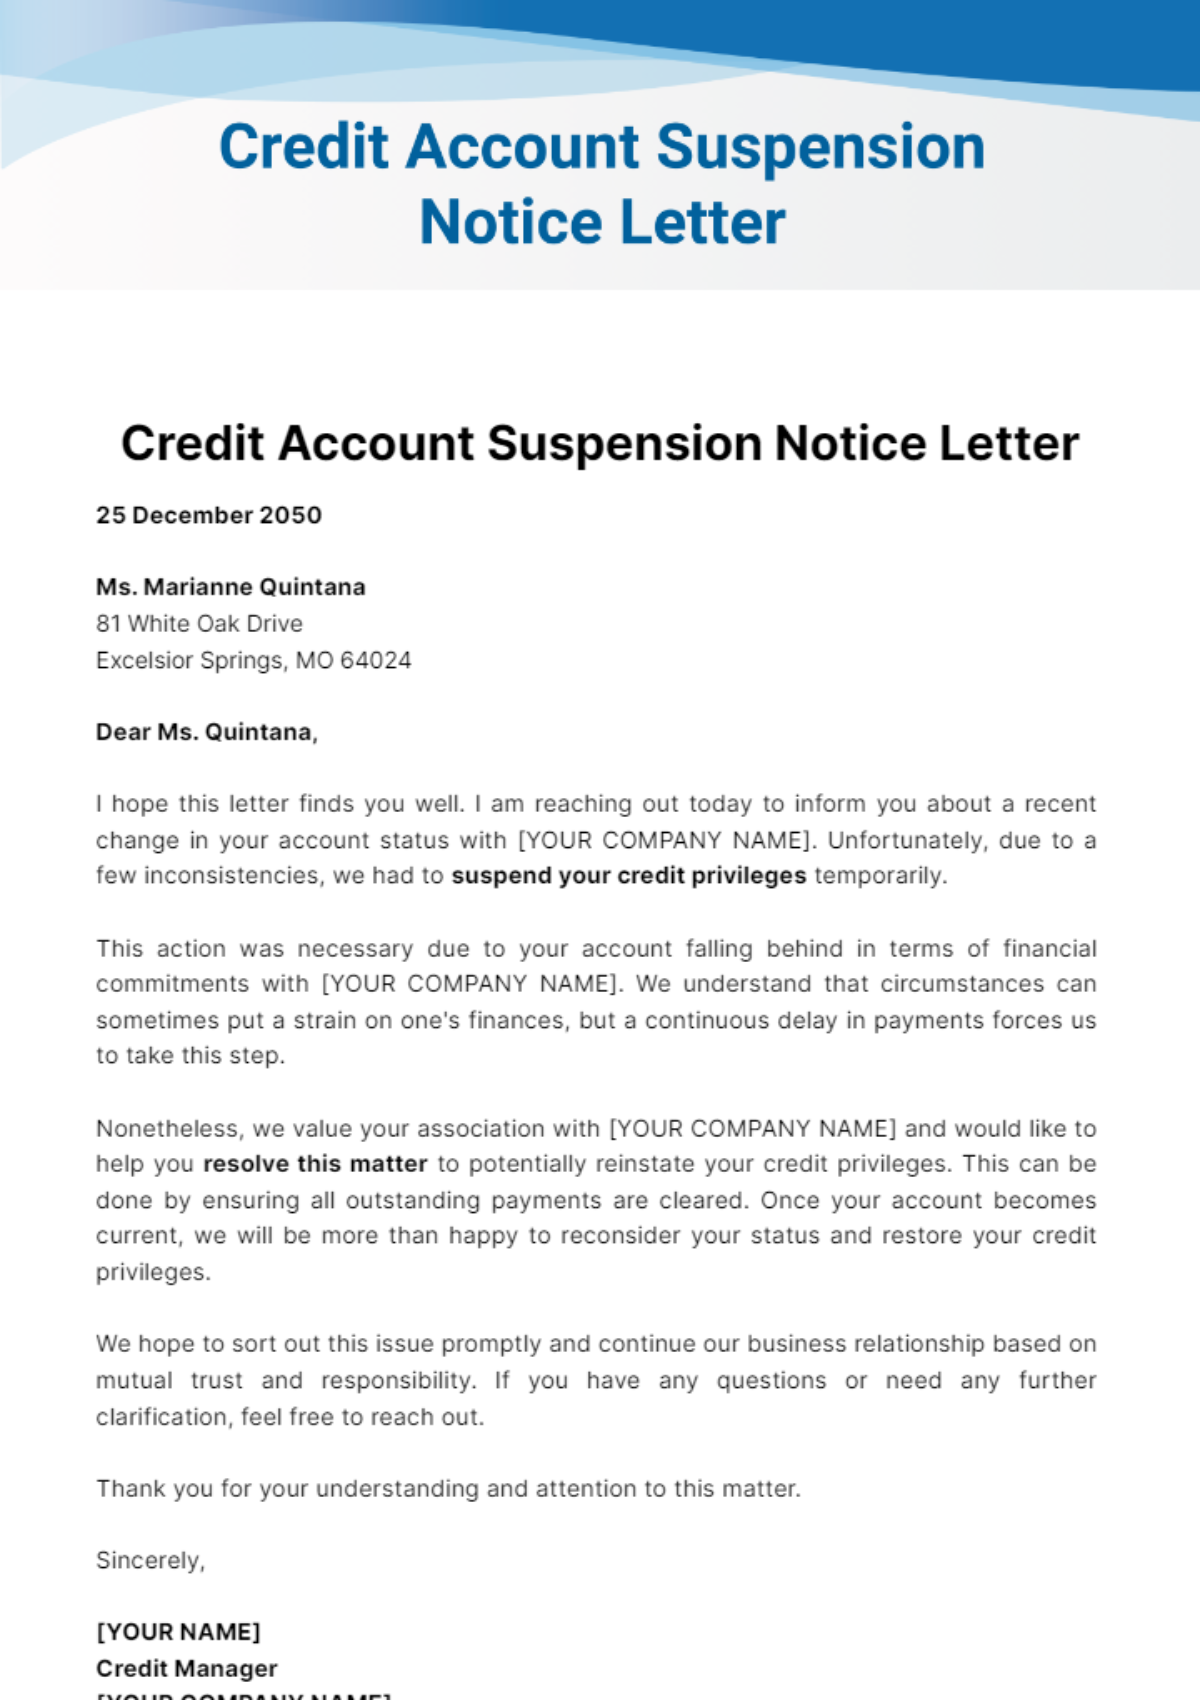 Free Credit Account Suspension Notice Letter Template